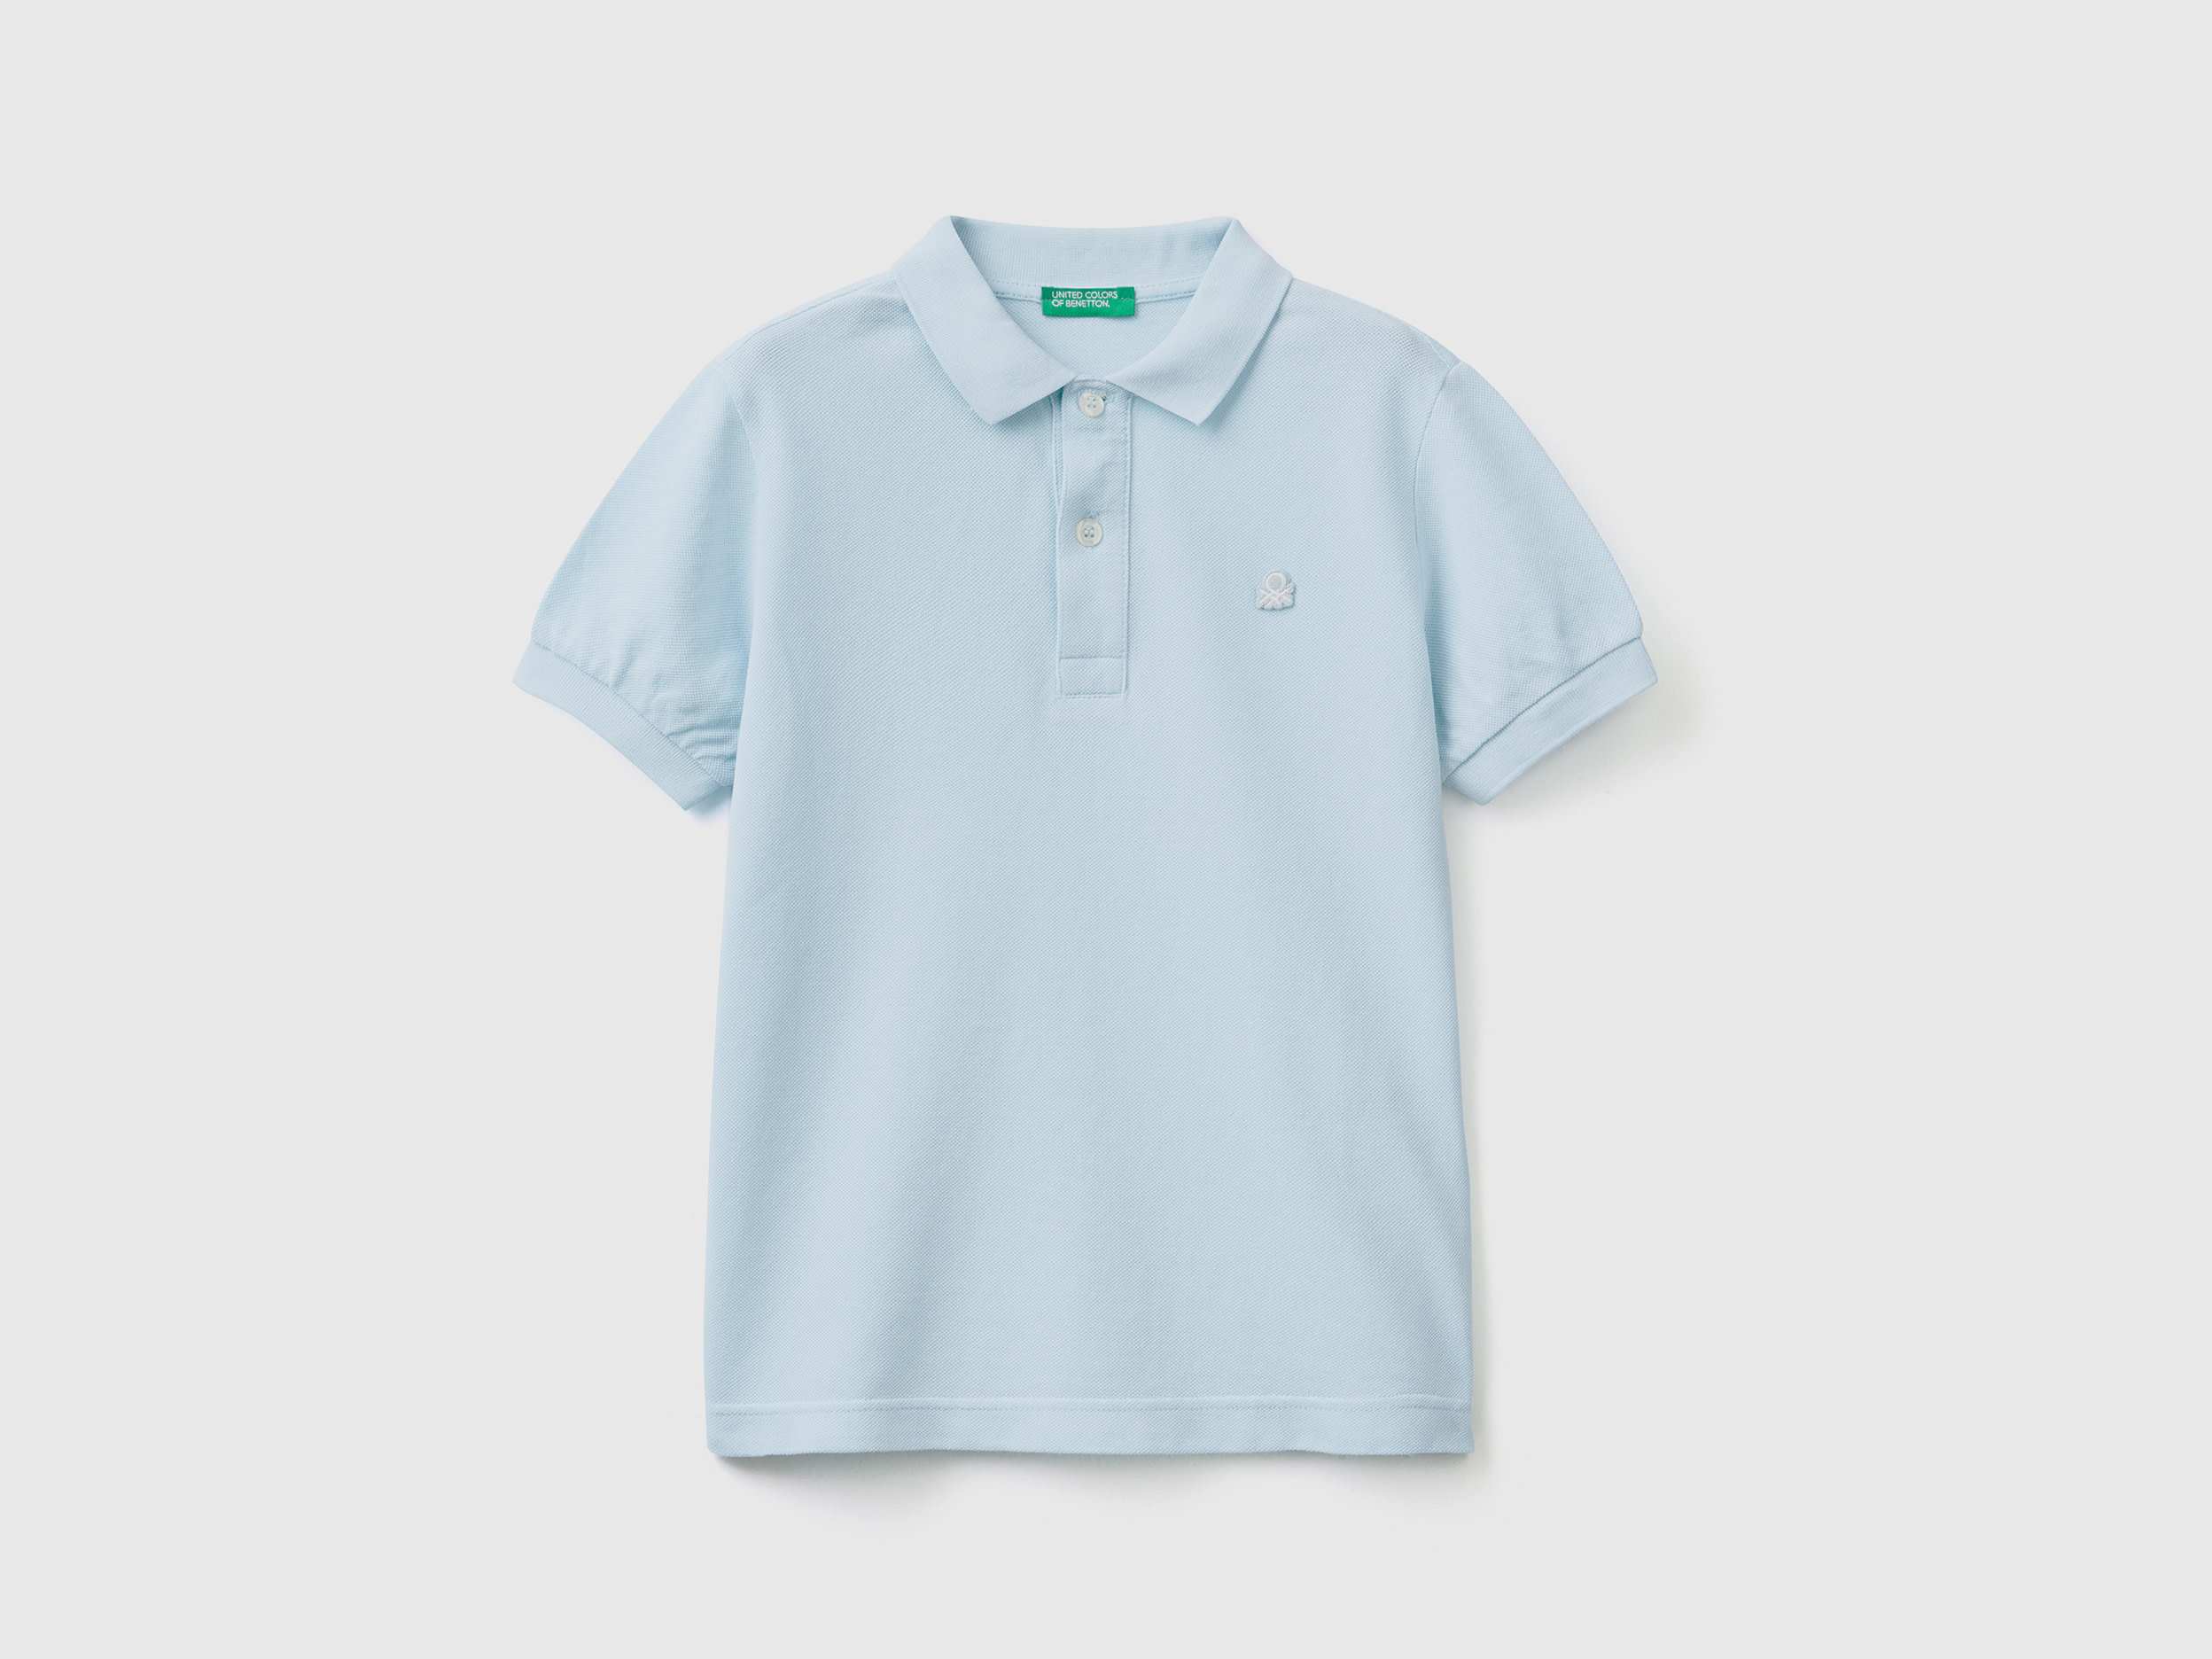 Image of Benetton, Slim Fit Polo In 100% Organic Cotton, size 3XL, Sky Blue, Kids